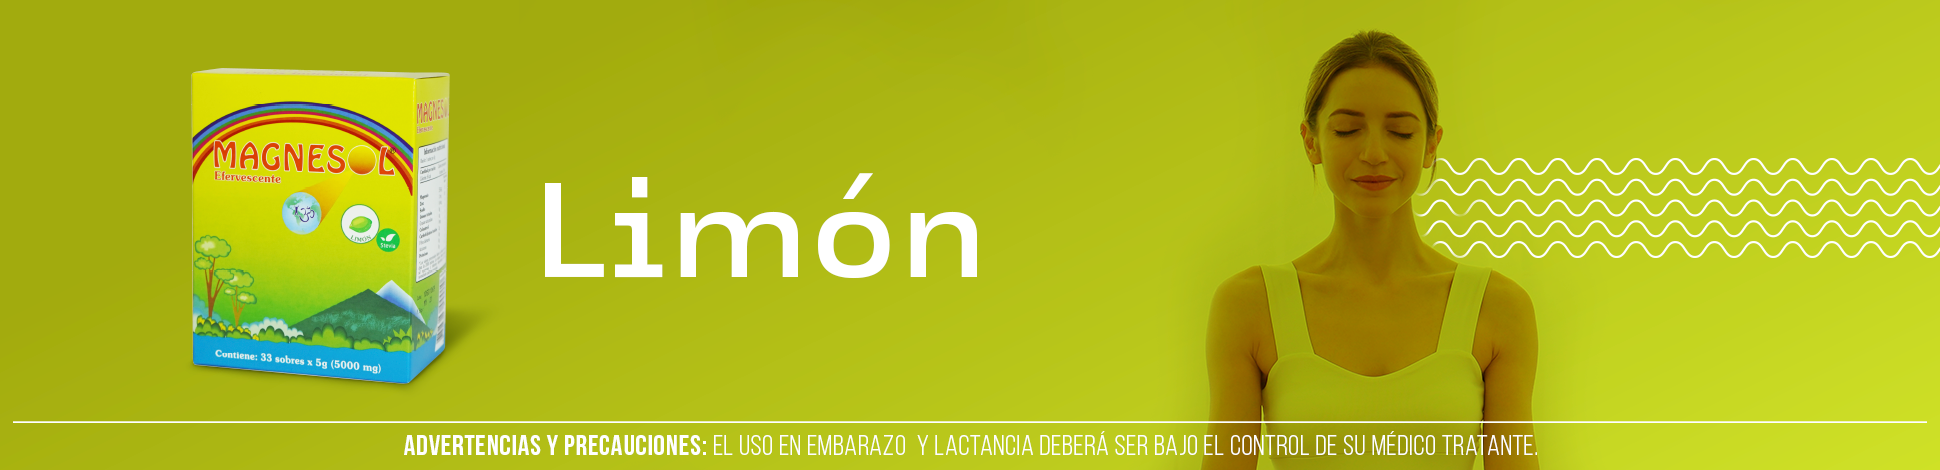 1940x470 magnesol limon.png